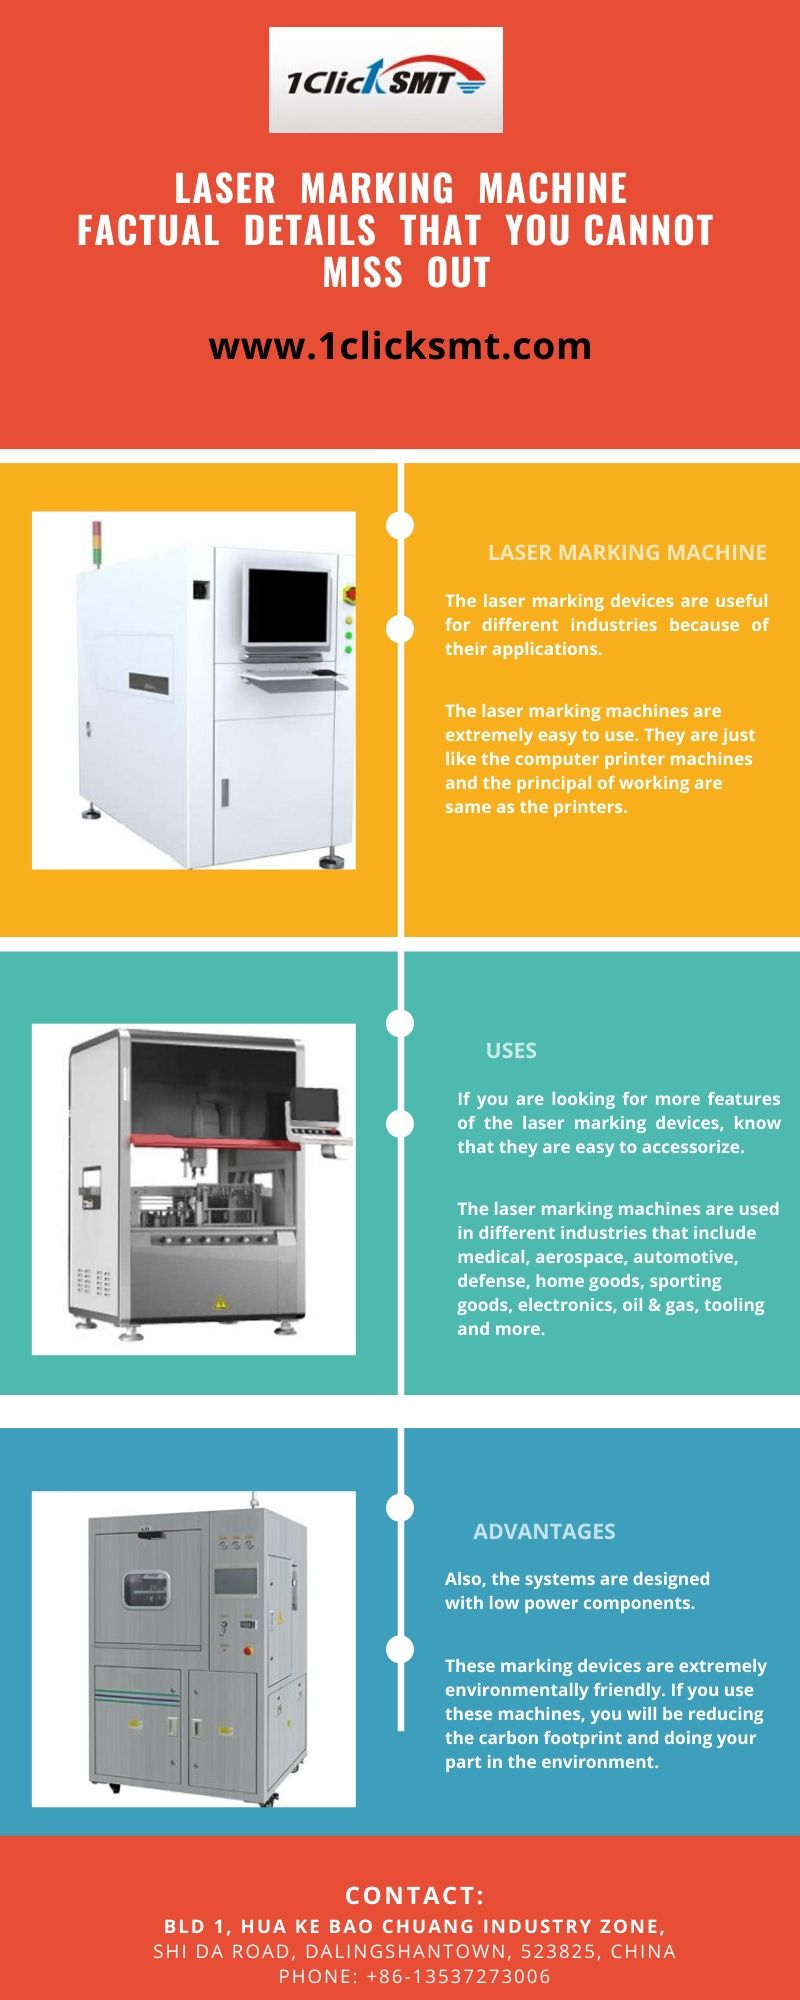 Laser marking machine Factual details that you cannot miss out.jpg  by 1clicksmt